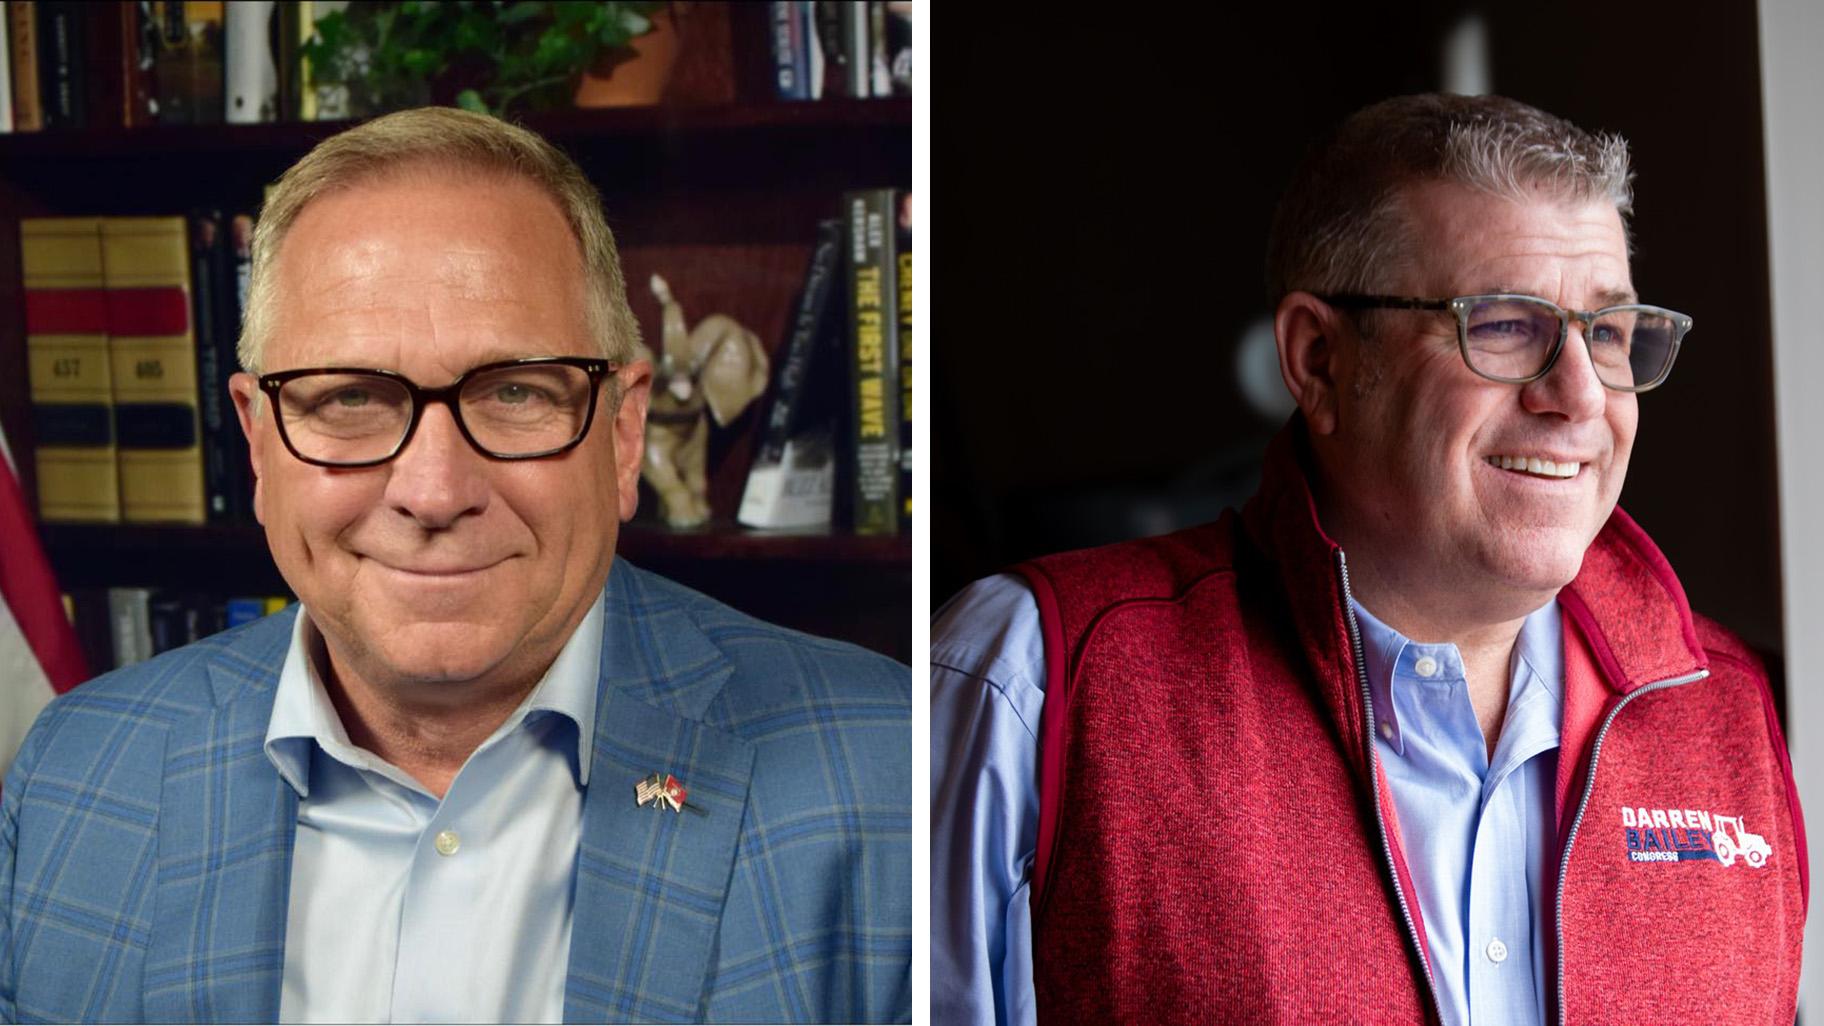 Rep. Mike Bost is challenged by state Sen. Darren Bailey. (Campaign photos)